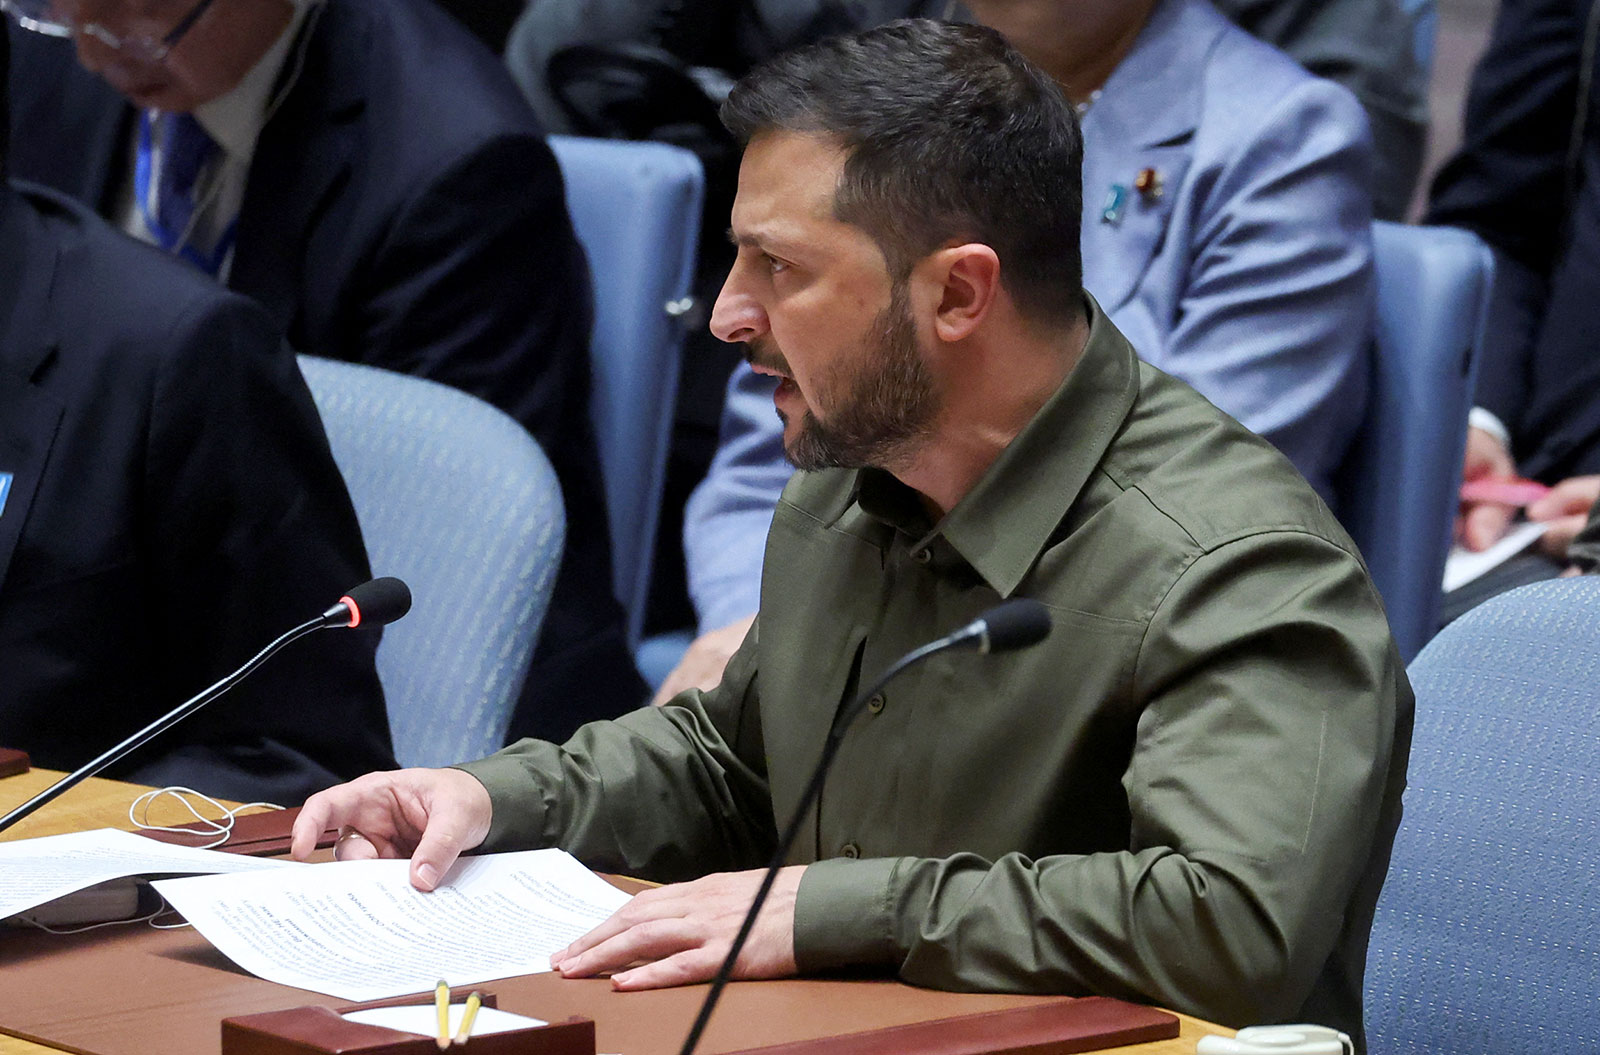 Ukrainian President Volodymyr Zelensky addresses the United Nations Security Council at the United Nations headquarters in New York, on Wednesday, September 20, 2023.